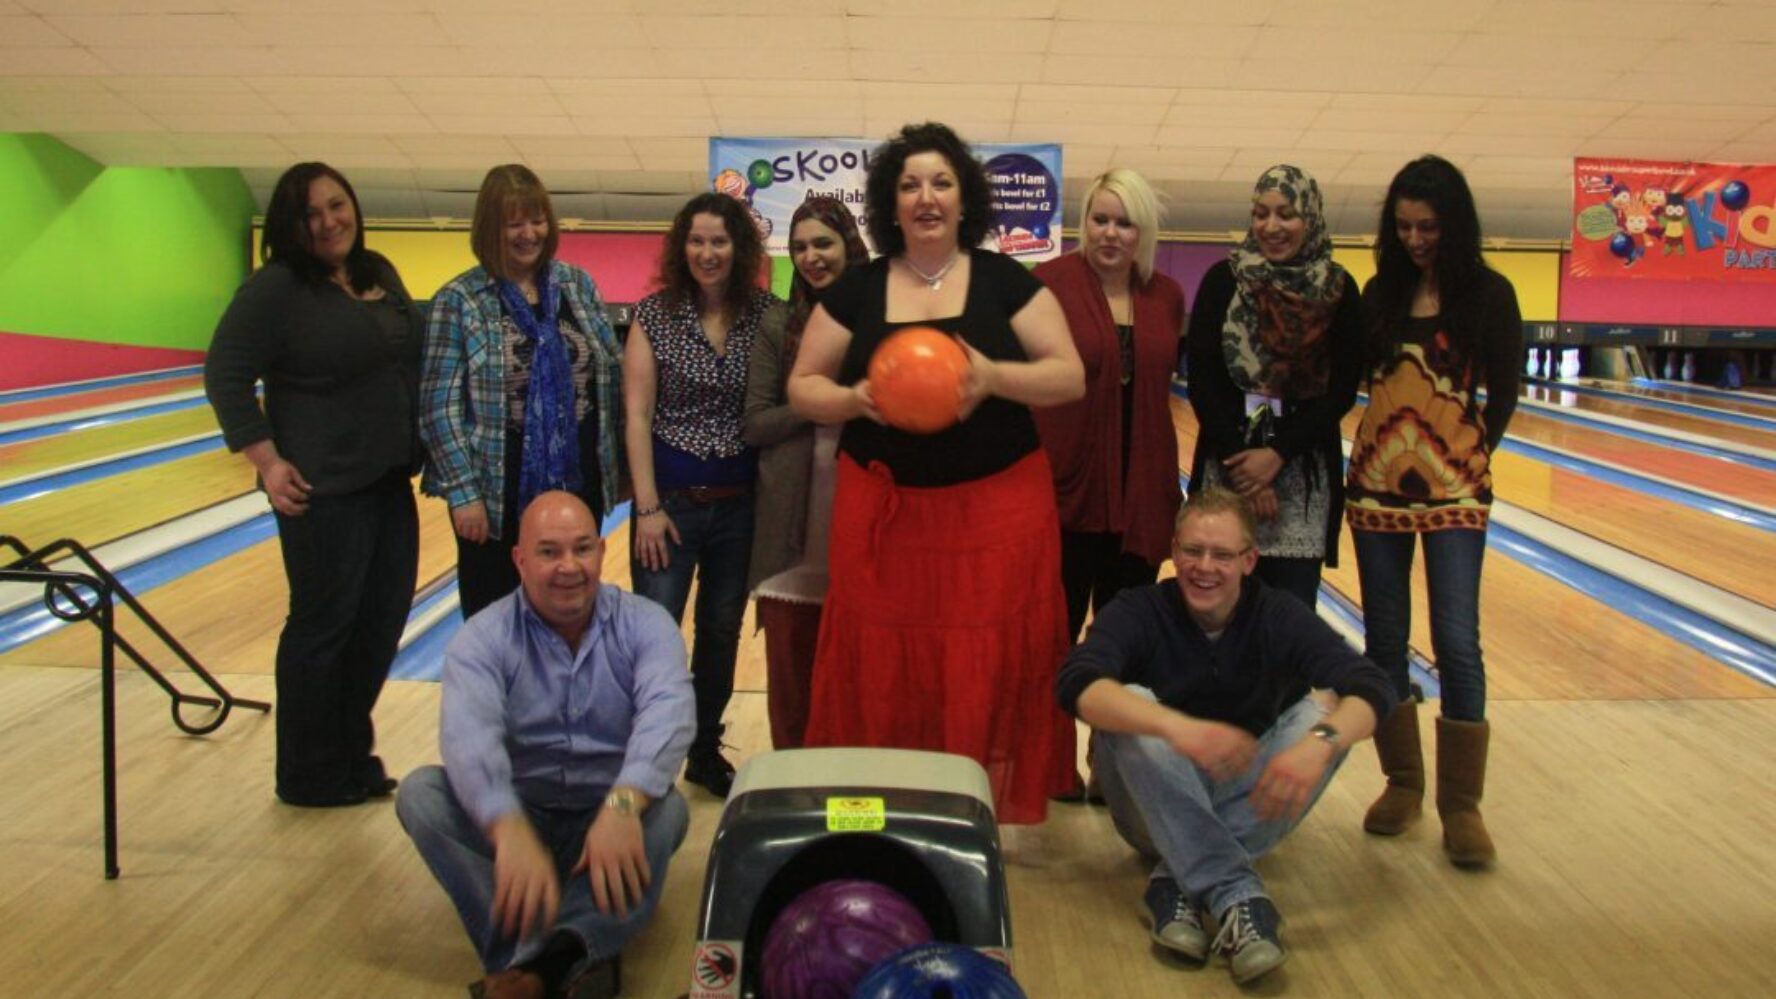 A group of people at a bowling alley